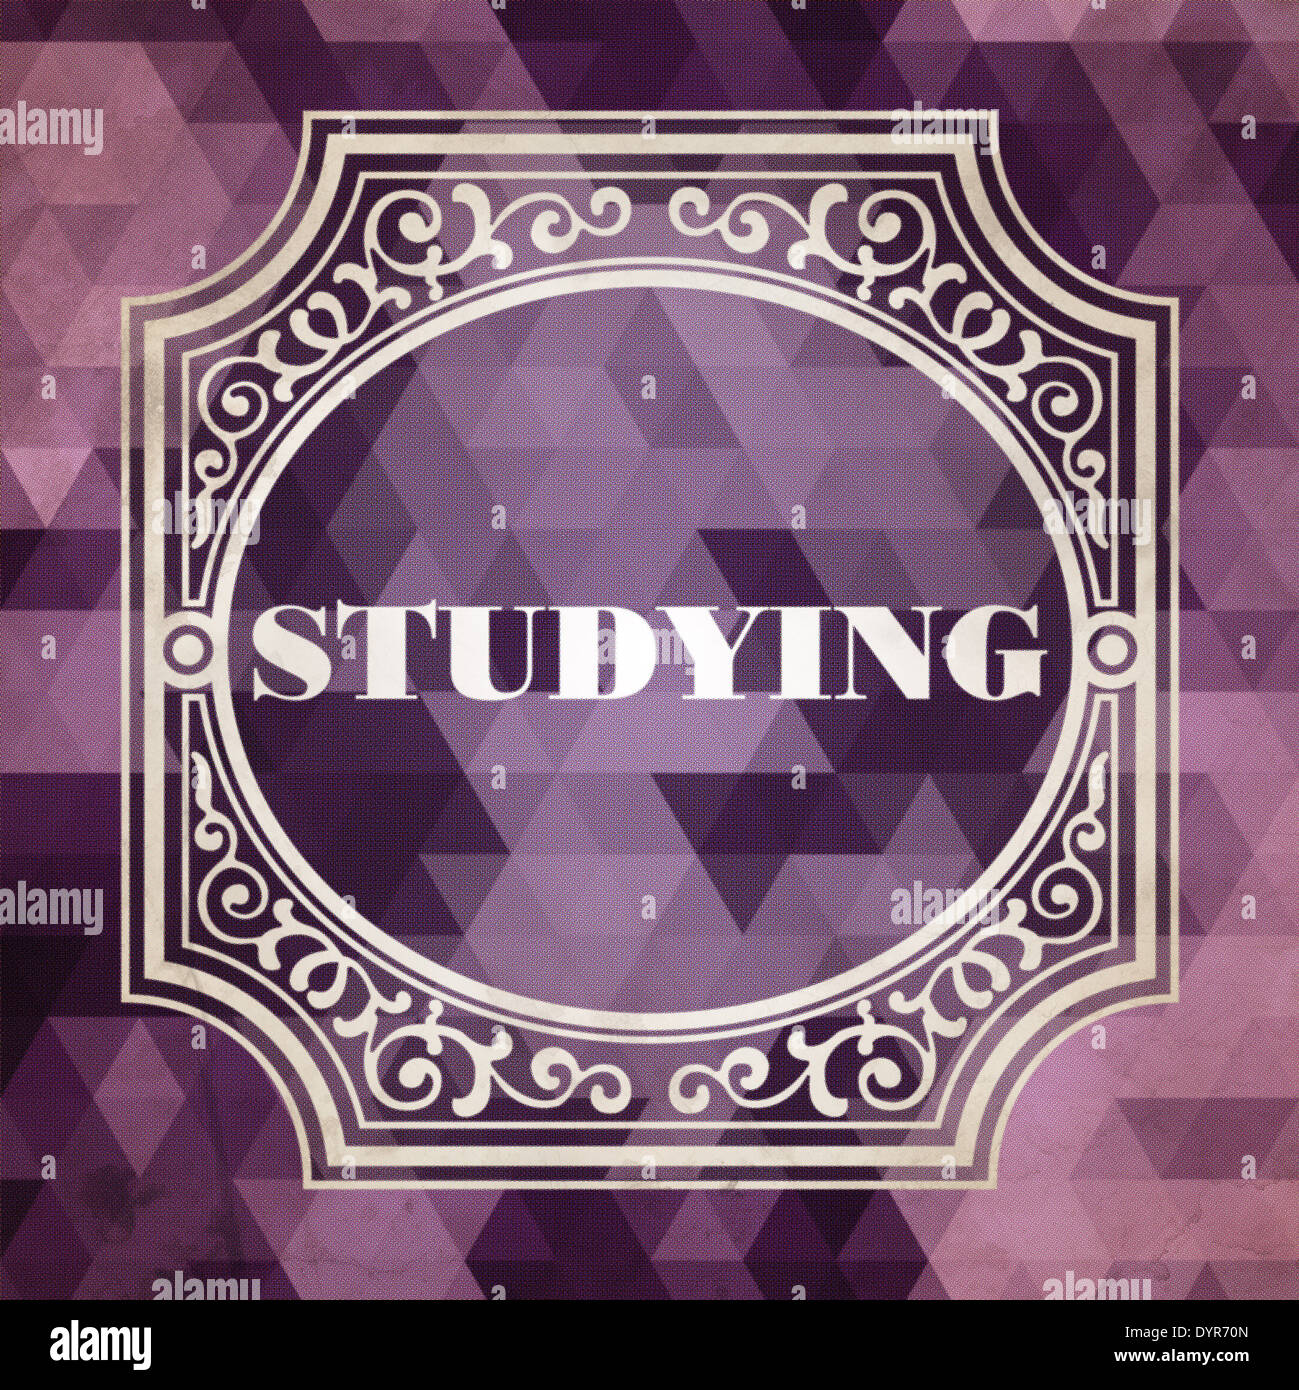 Studying Concept. Vintage design. Purple Background made of Triangles. Stock Photo